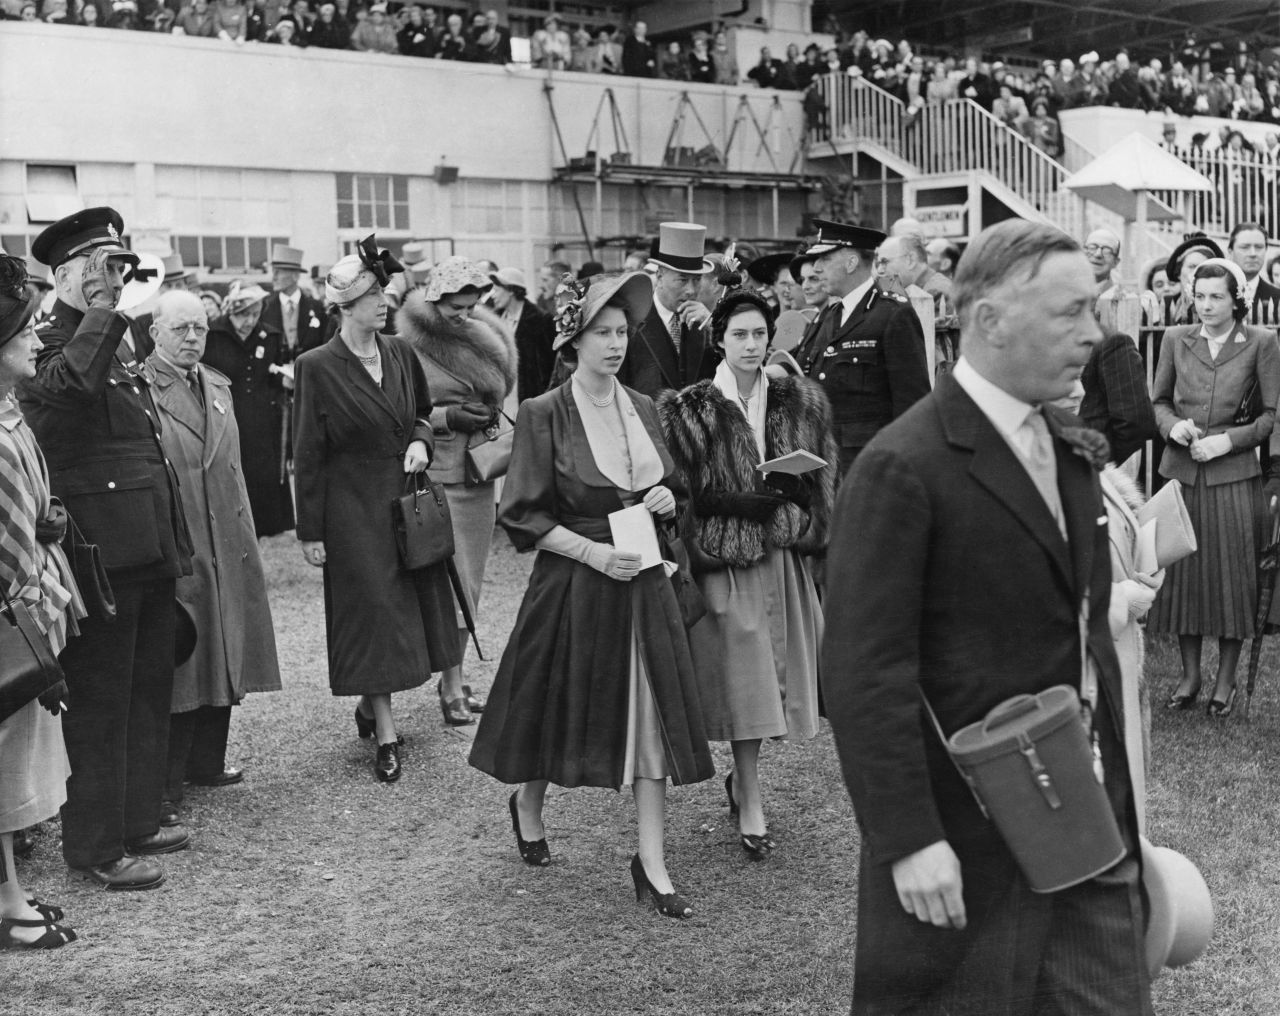 A fan of horse racing from a young age, then-Princess Elizabeth is seen walking through the paddock at the Epsom Downs racecourse during the derby on May 27, 1950. An appearance at Epsom Derby would be her first official engagement as queen several years later.